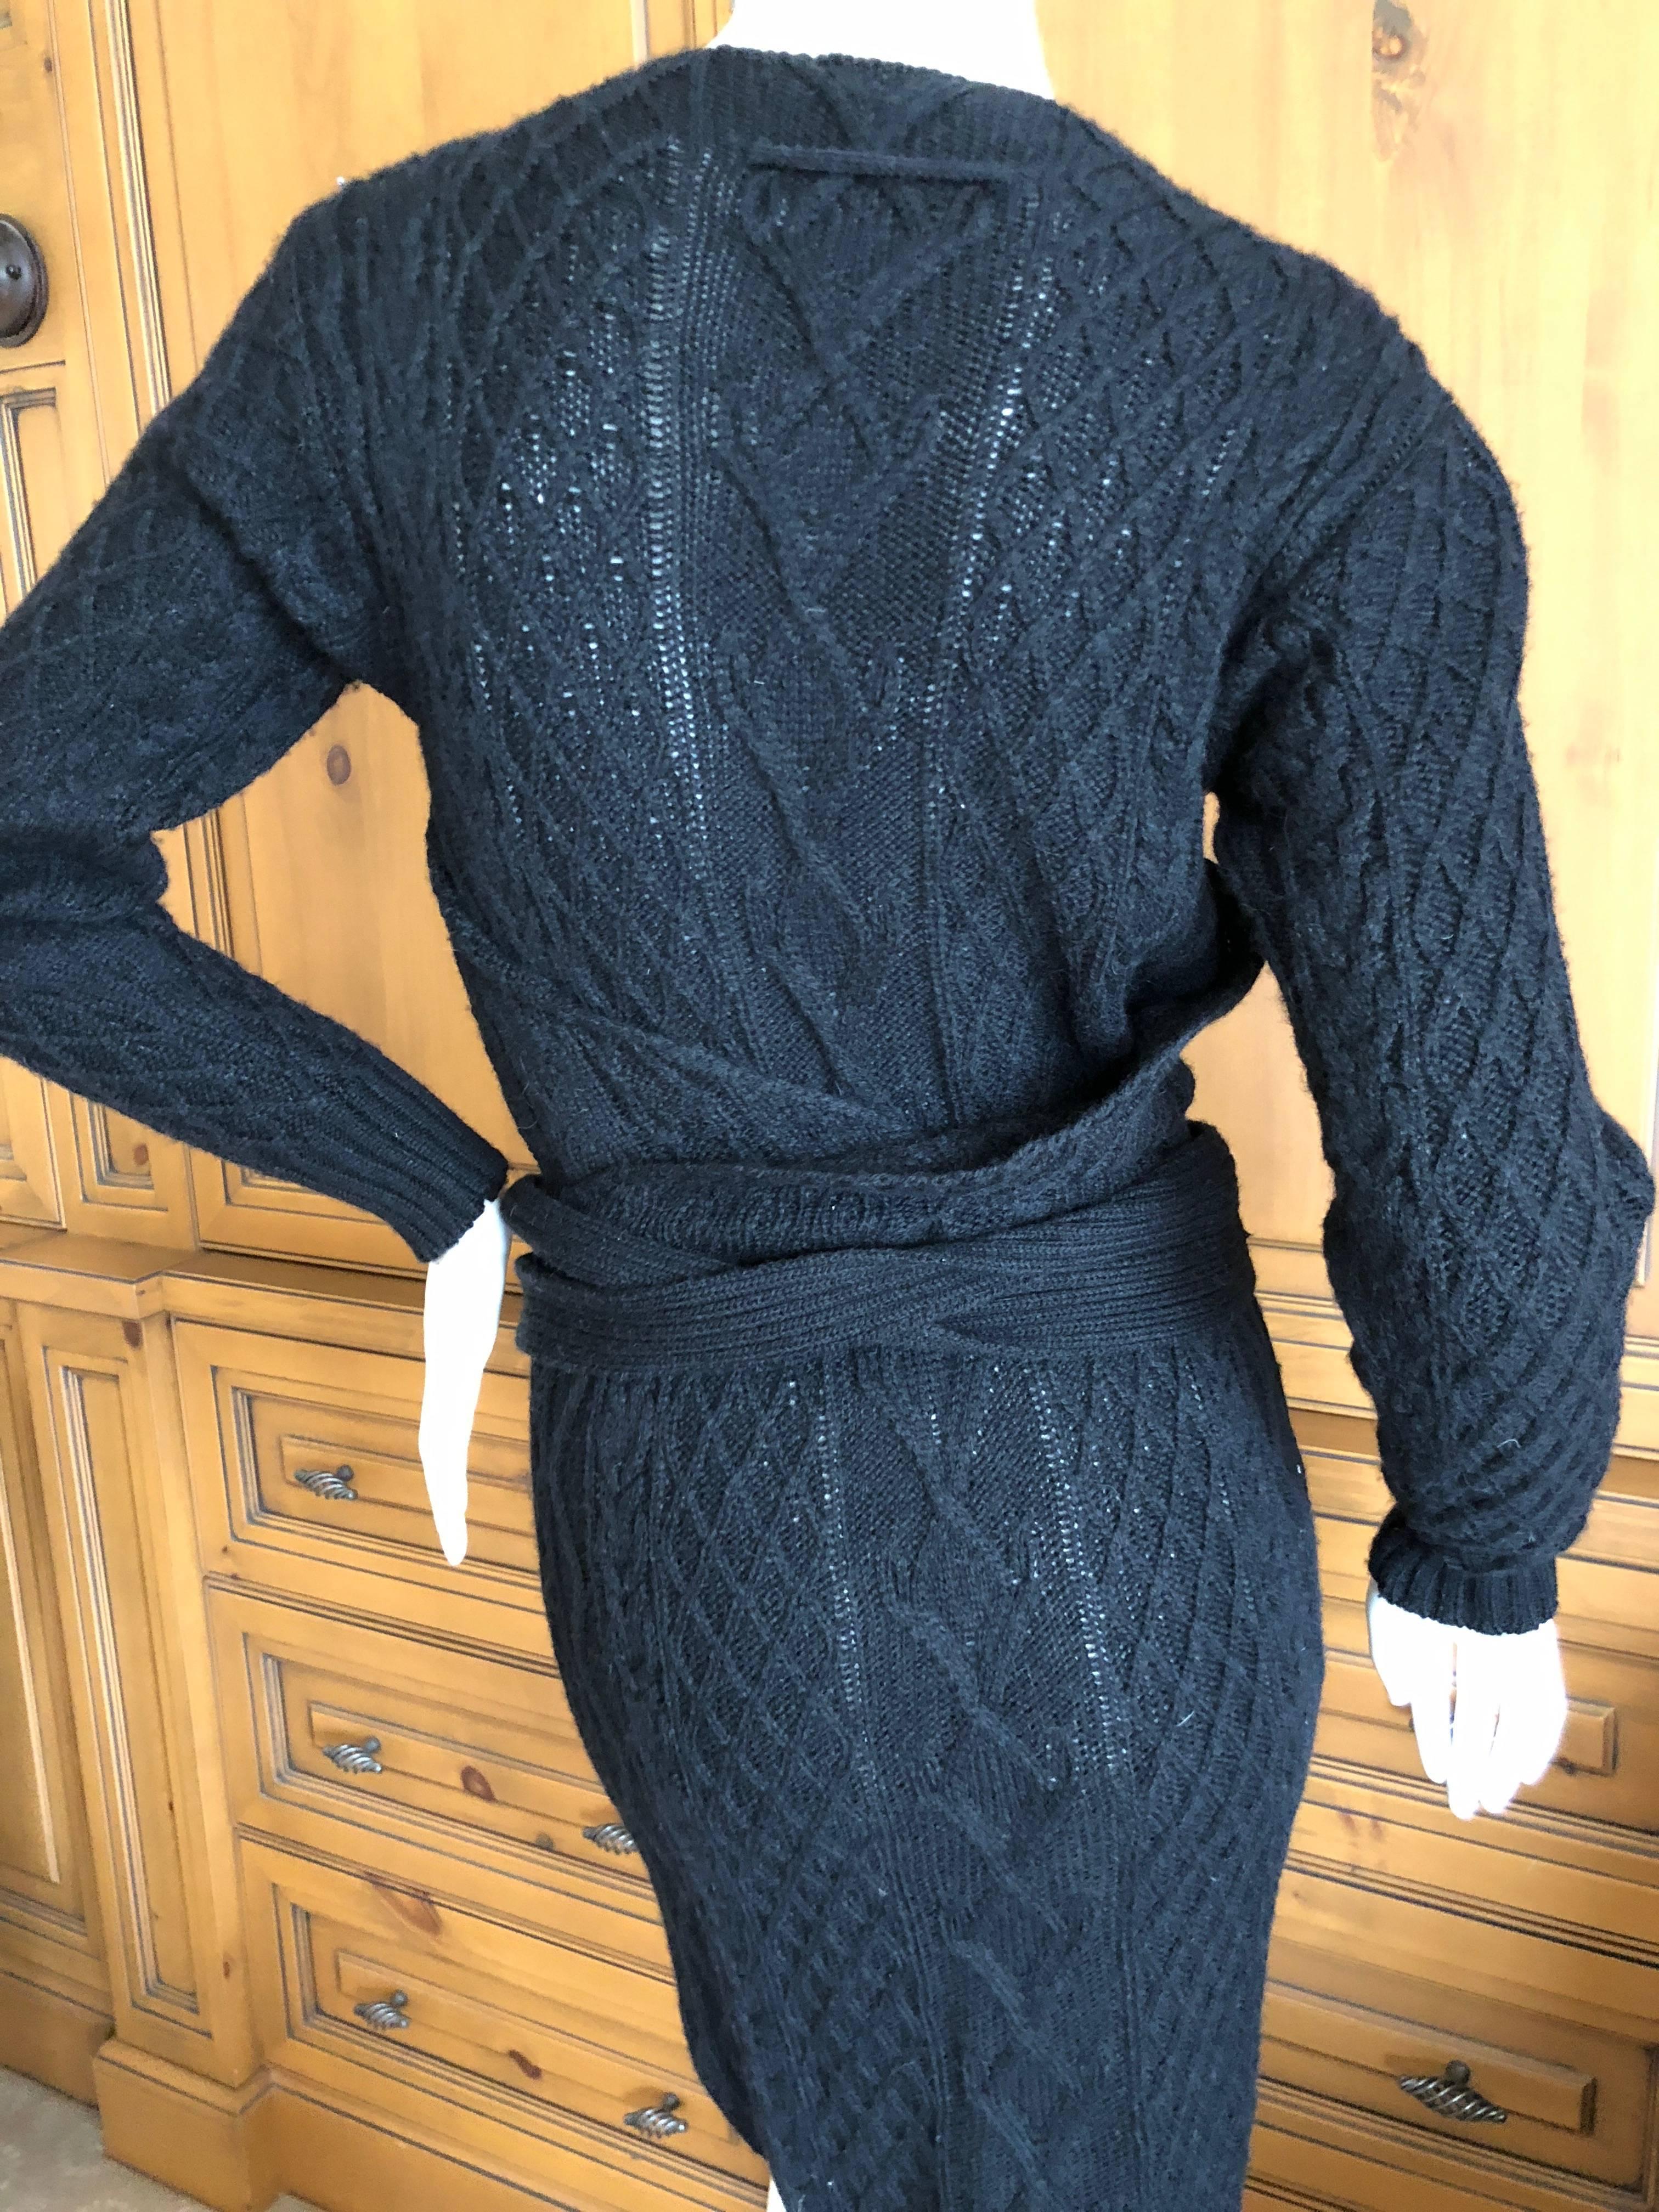 Jean Paul Gaultier Angora Blend Cable Knit Dress with Draped Metal Mesh Bodice  For Sale 4